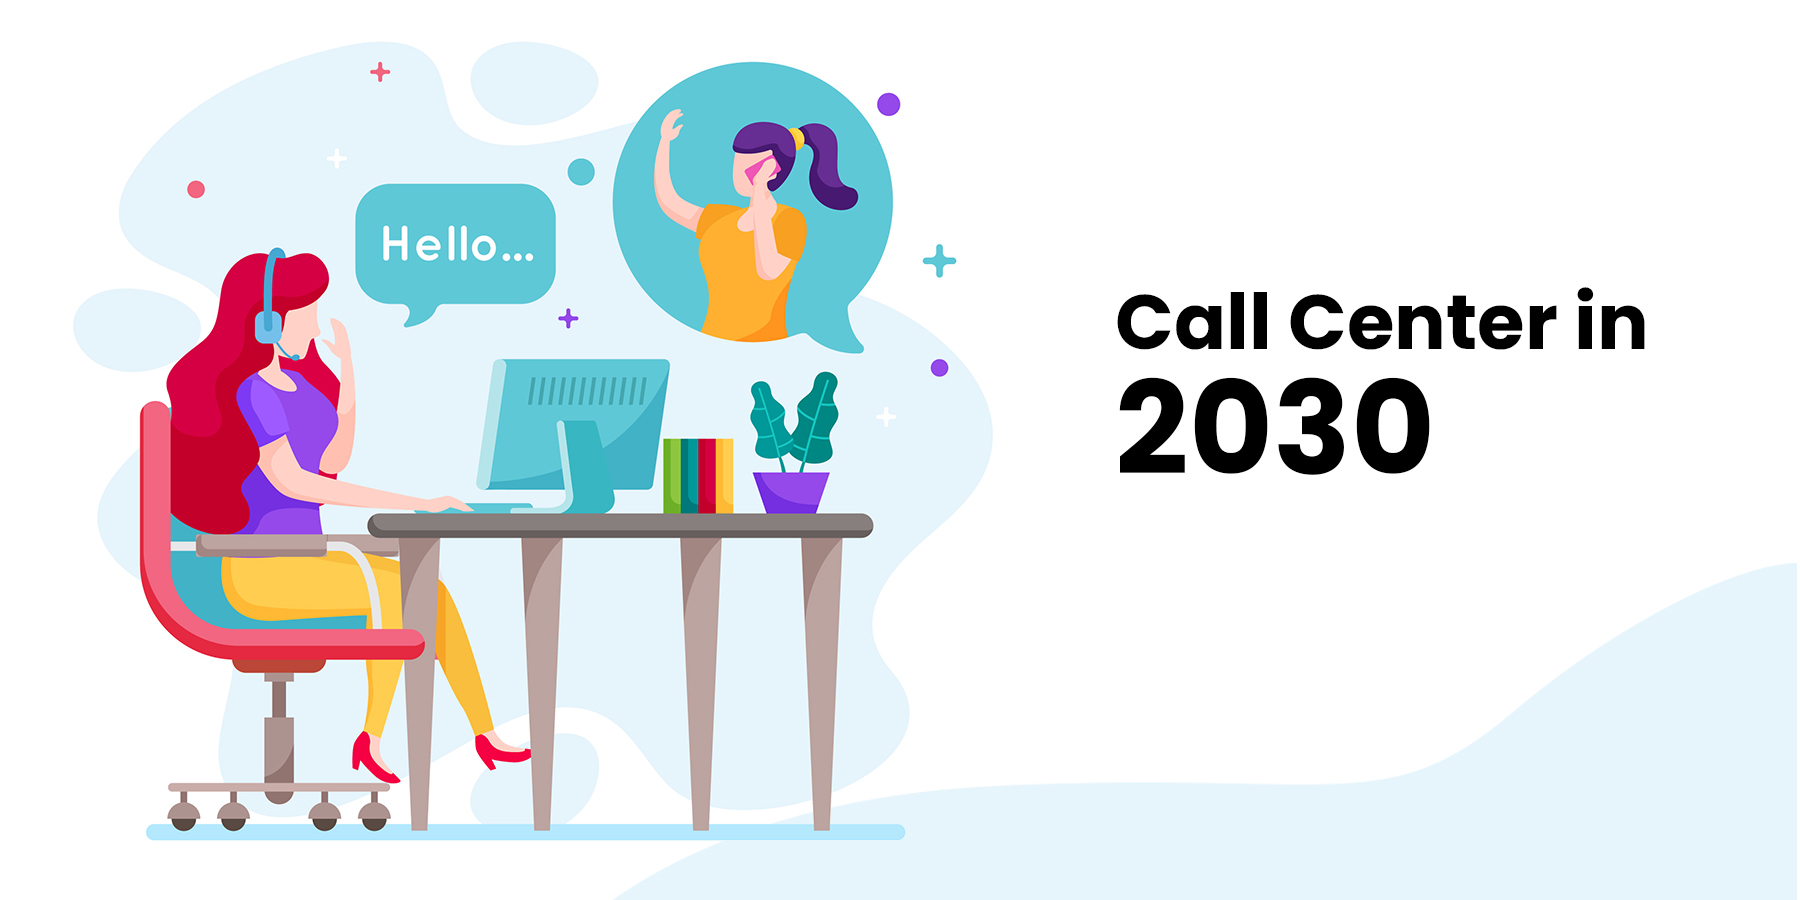 Call Center in 2030